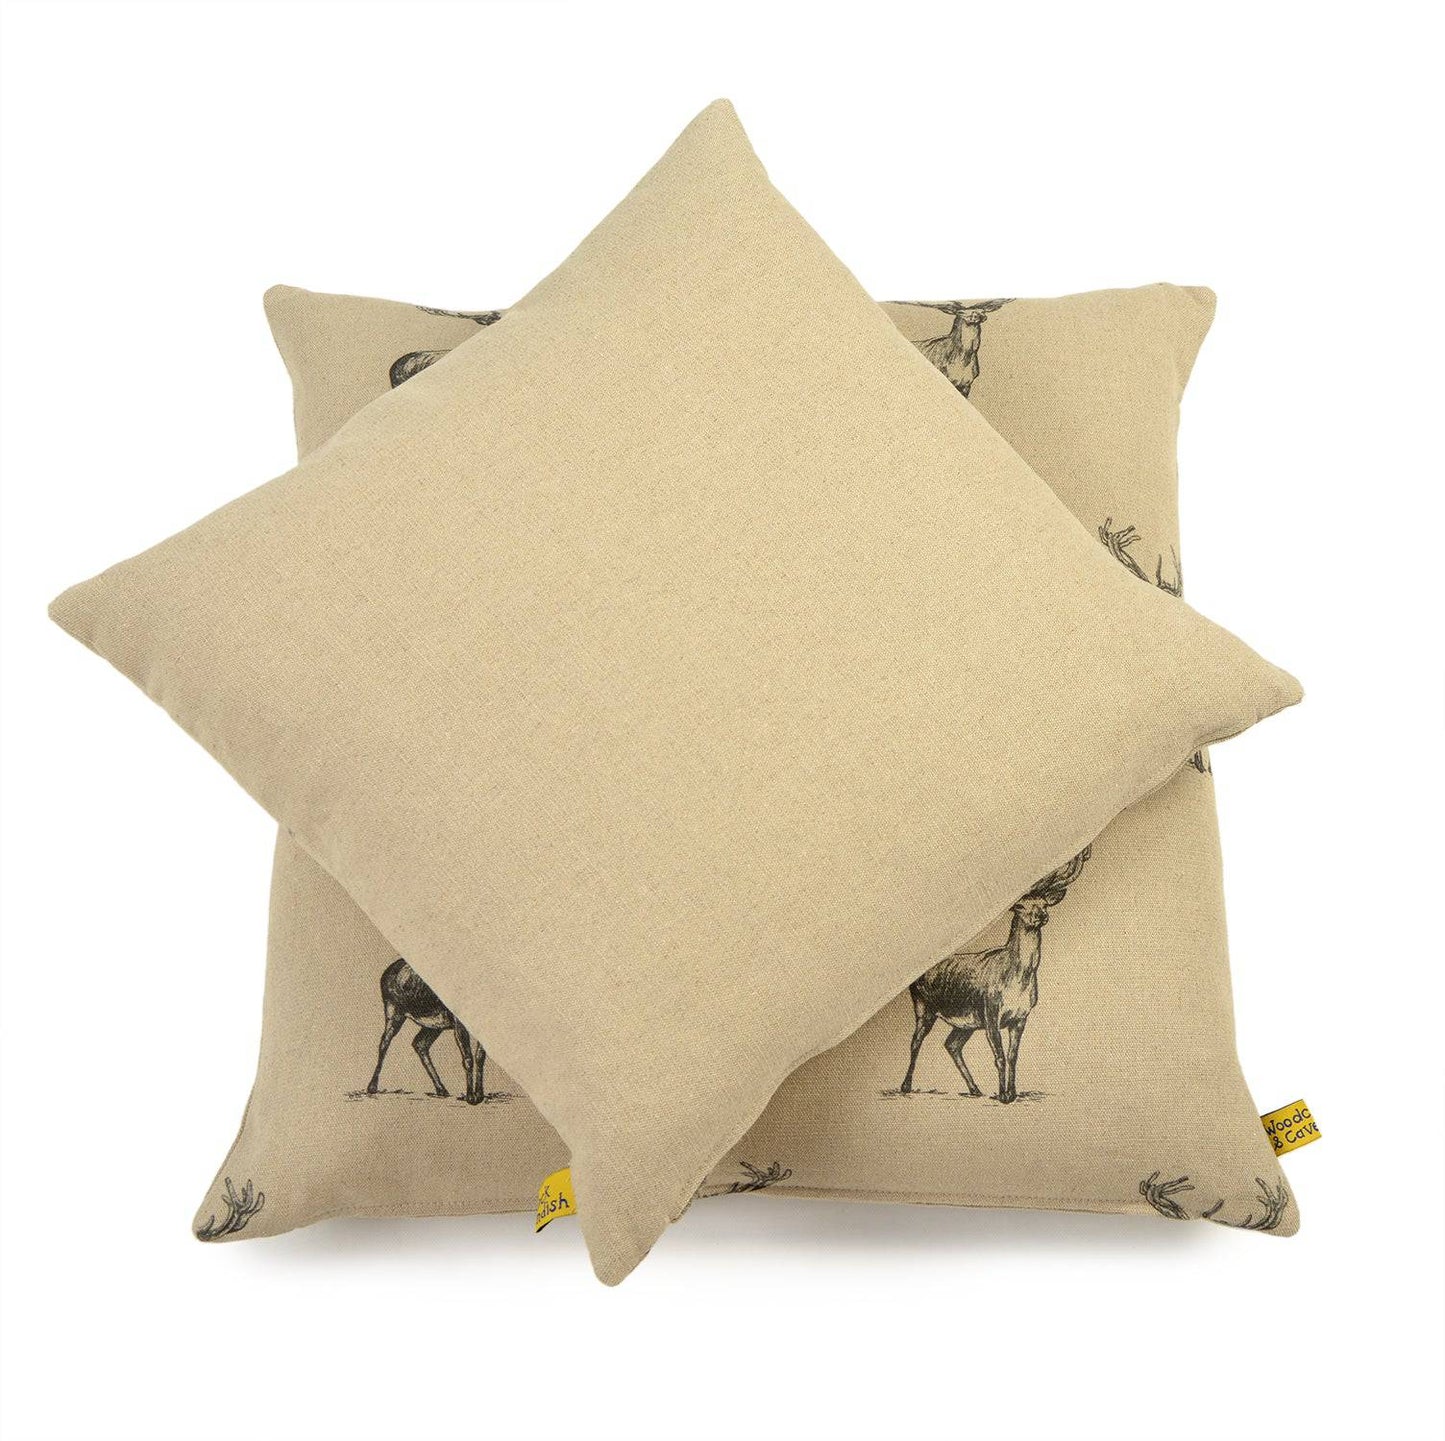 Stag Linen Cushion by Woodcock & Cavendish for sale - Woodcock and Cavendish